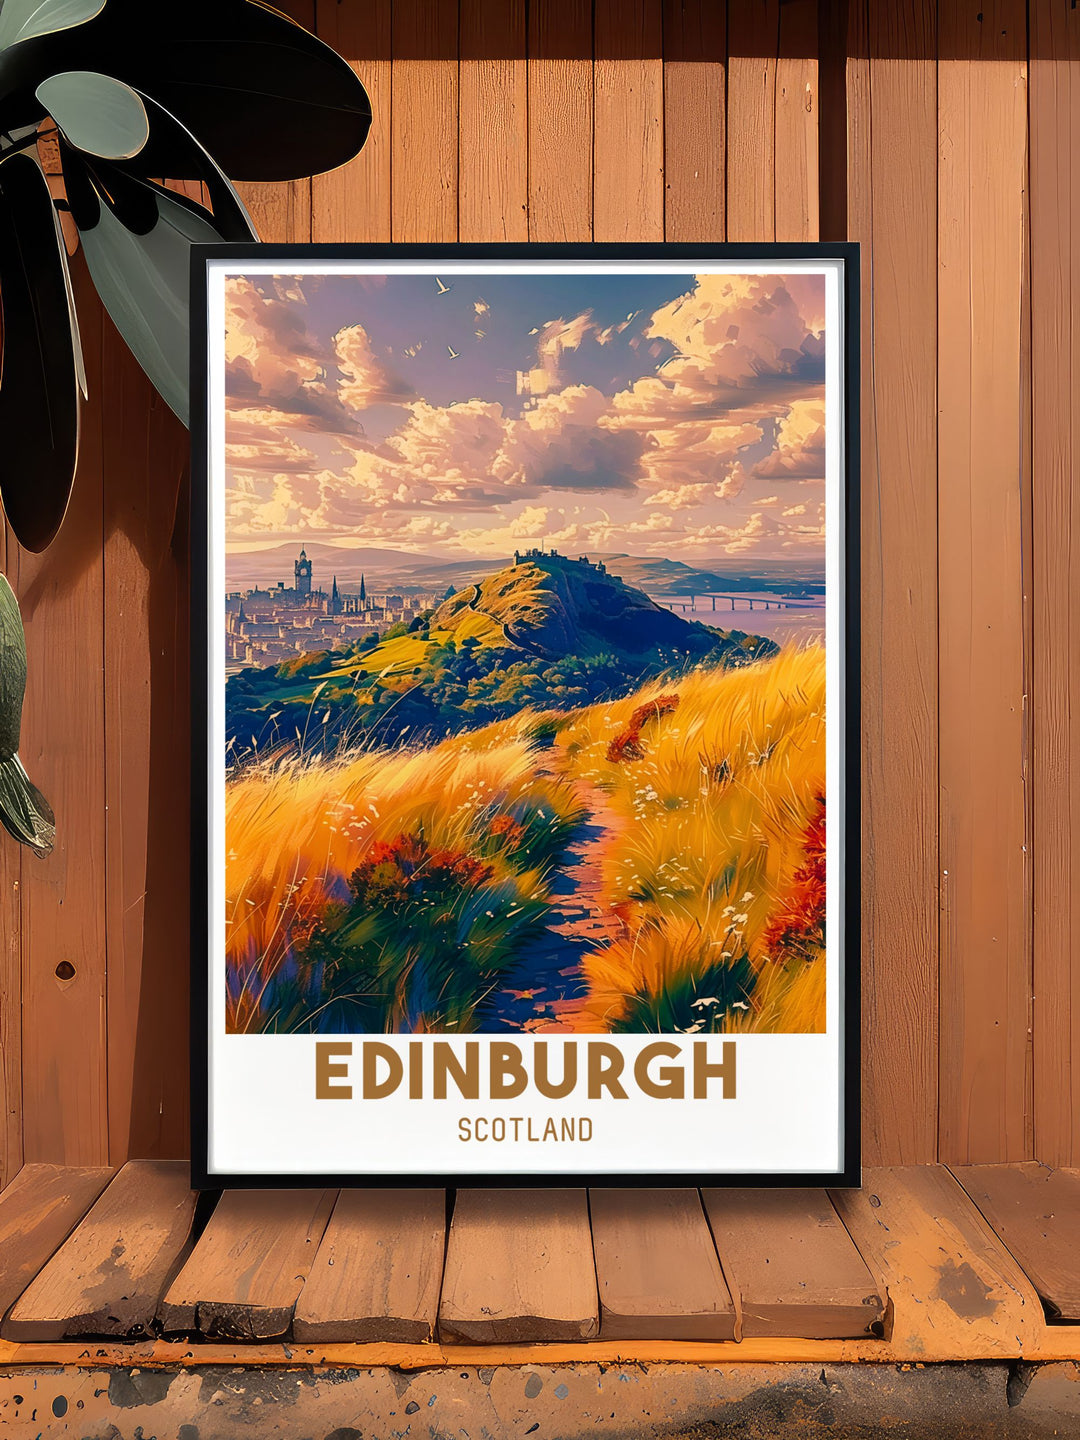 Gallery wall art illustrating the lively and historic Royal Mile in Edinburgh, ideal for adding a touch of Scottish charm to any room.